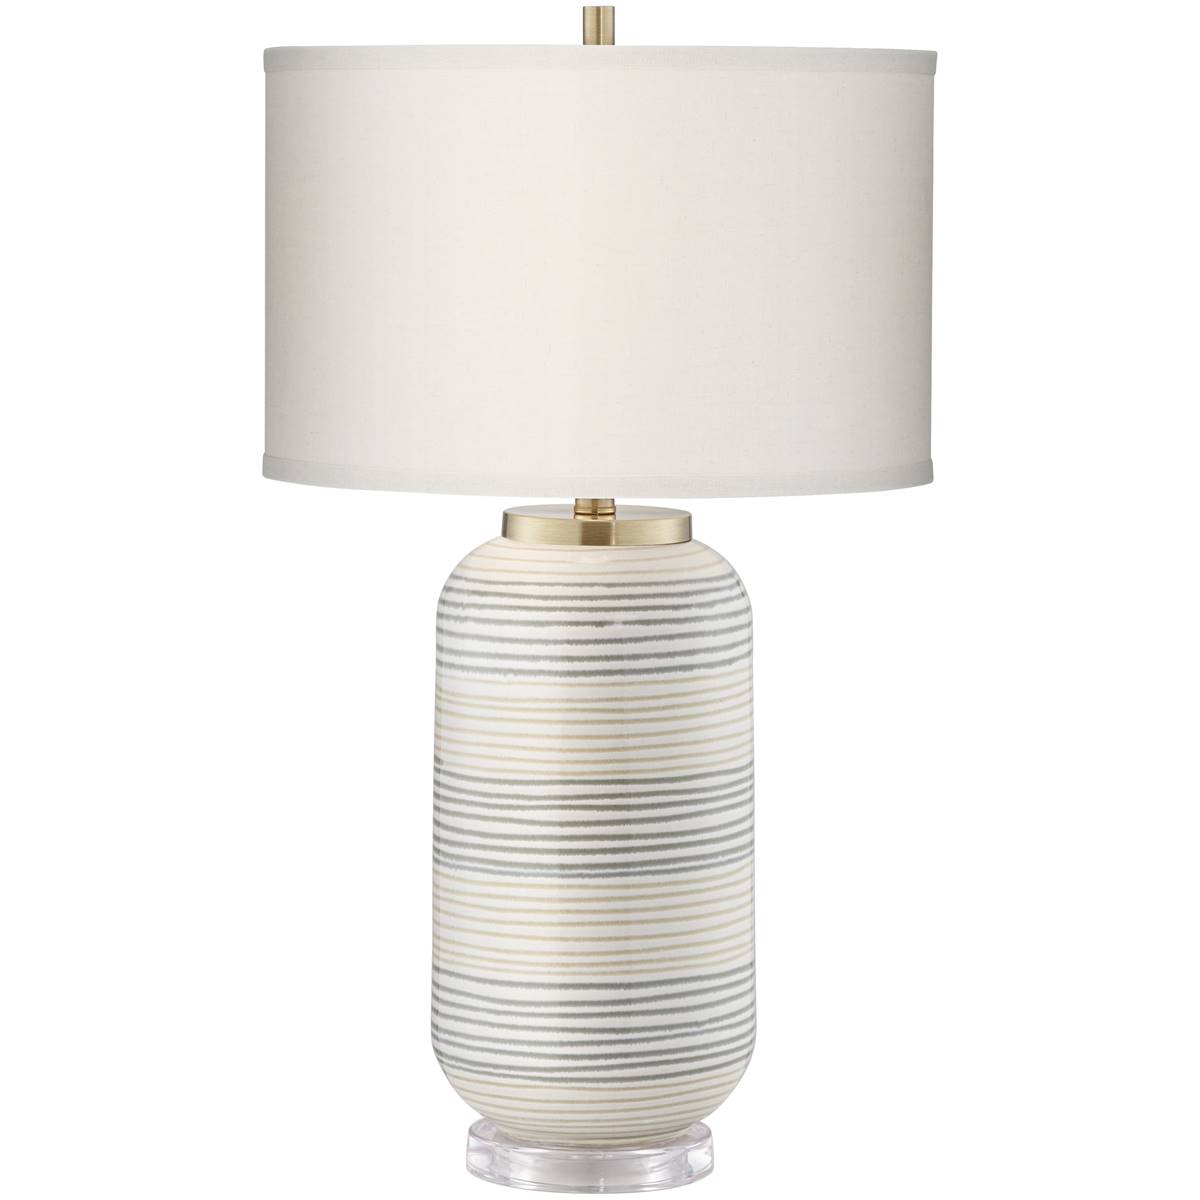 Pacific Coast Lighting Striped Adler 28in. Multi Color Table Lamp